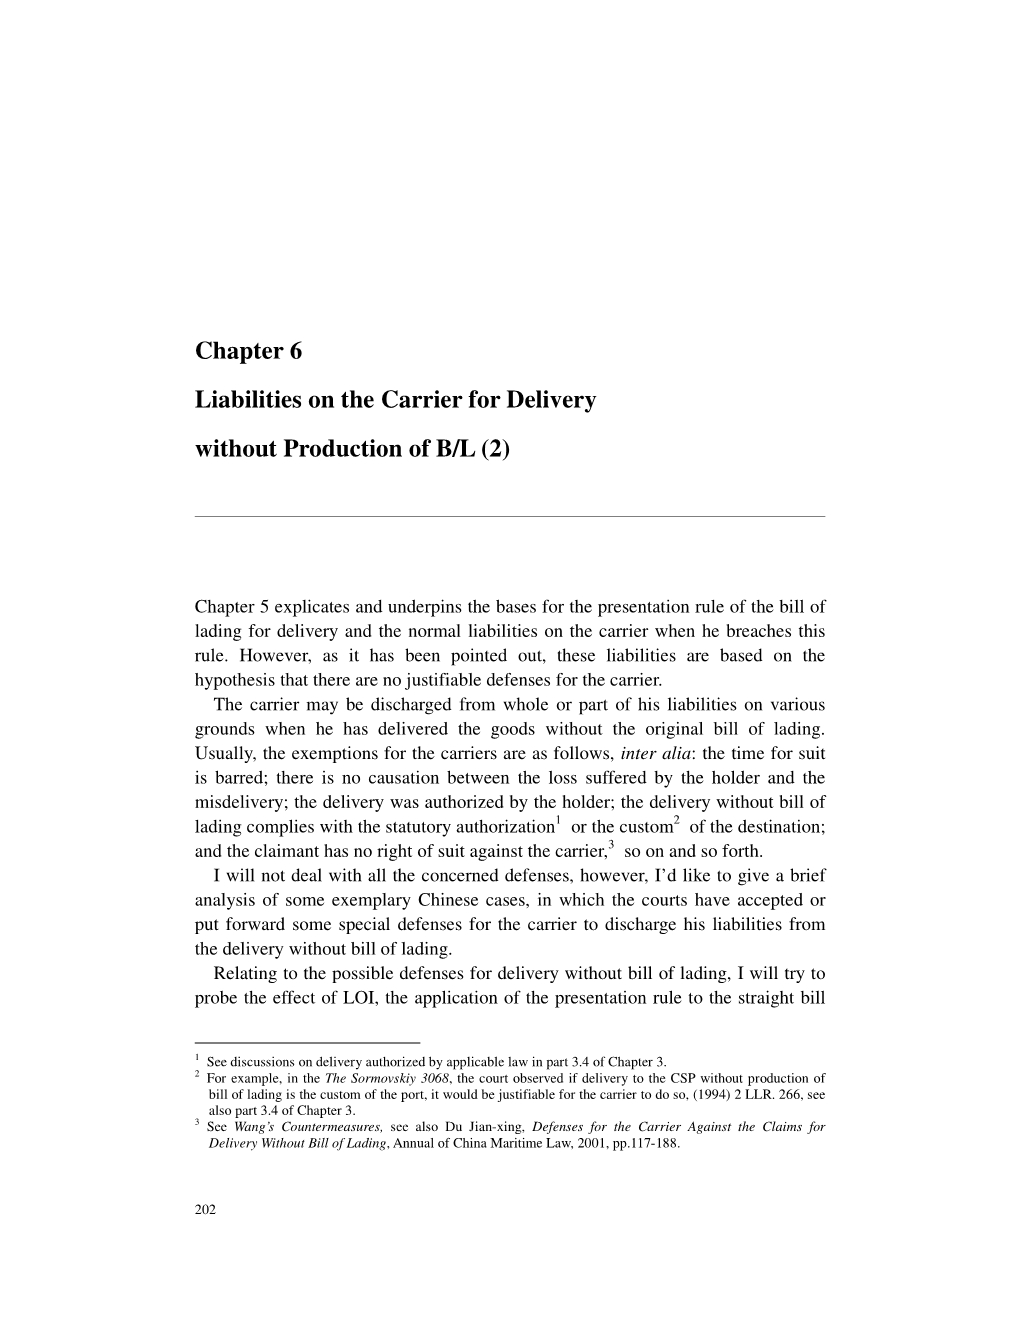 Chapter 6 Liabilities on the Carrier for Delivery Without Production of B/L (2)